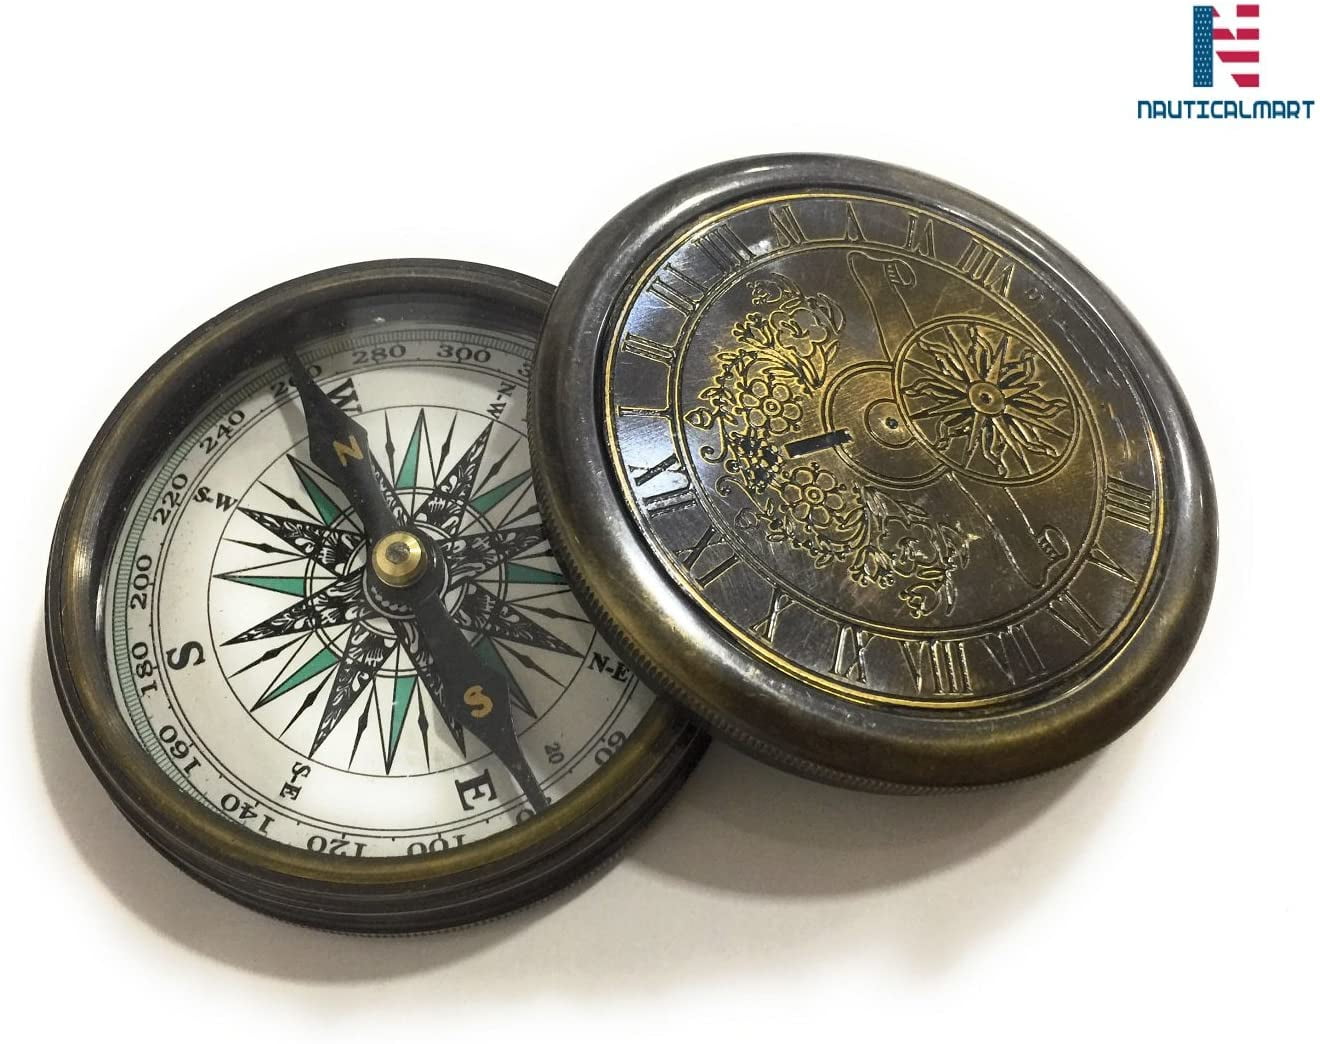 Vintage Nautical Marine Robert Frost Compass For Gifting Item 